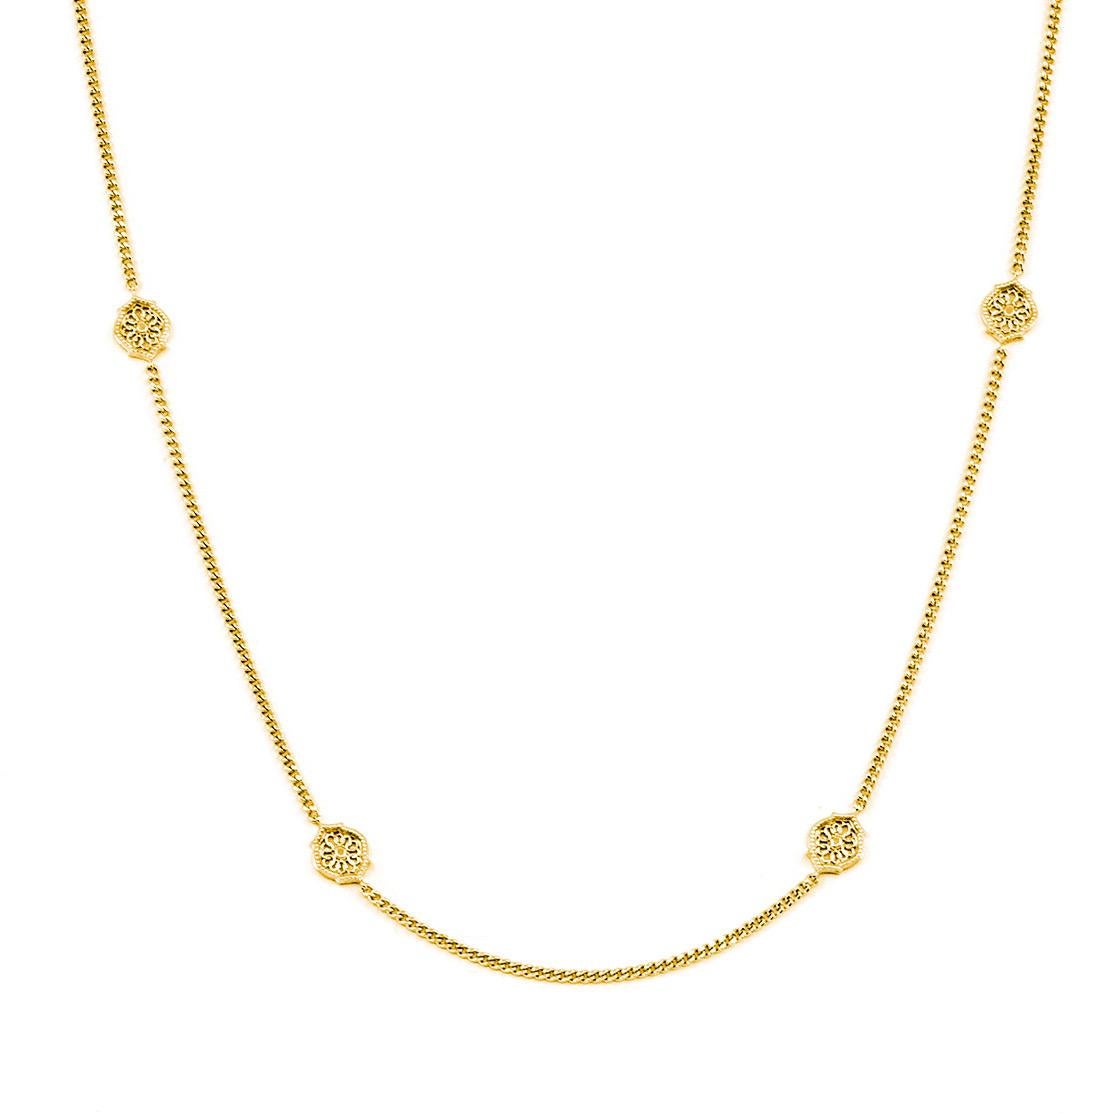 Contemporary 18 Karat Yellow Gold Mauresque Necklace Natalie Barney For Sale